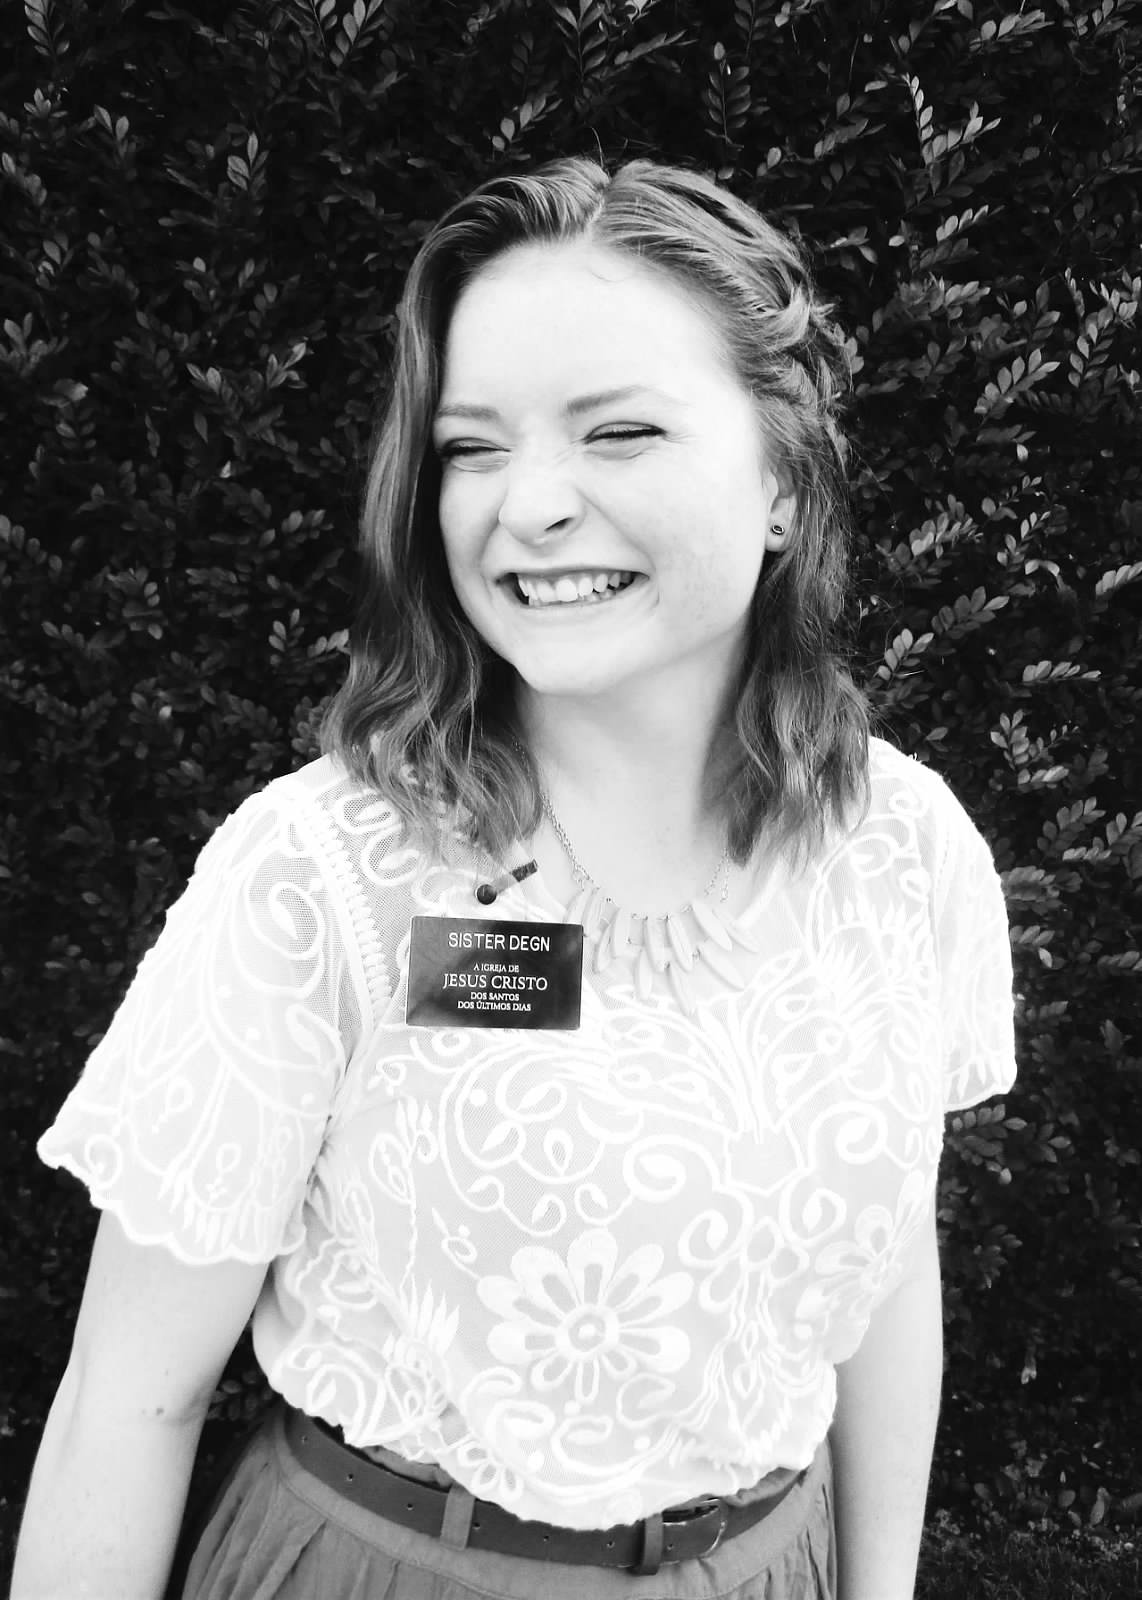 A black and white photo of a young woman, Emily Degn, wearing her Mormon name tag saying Sister Degn and smiling.